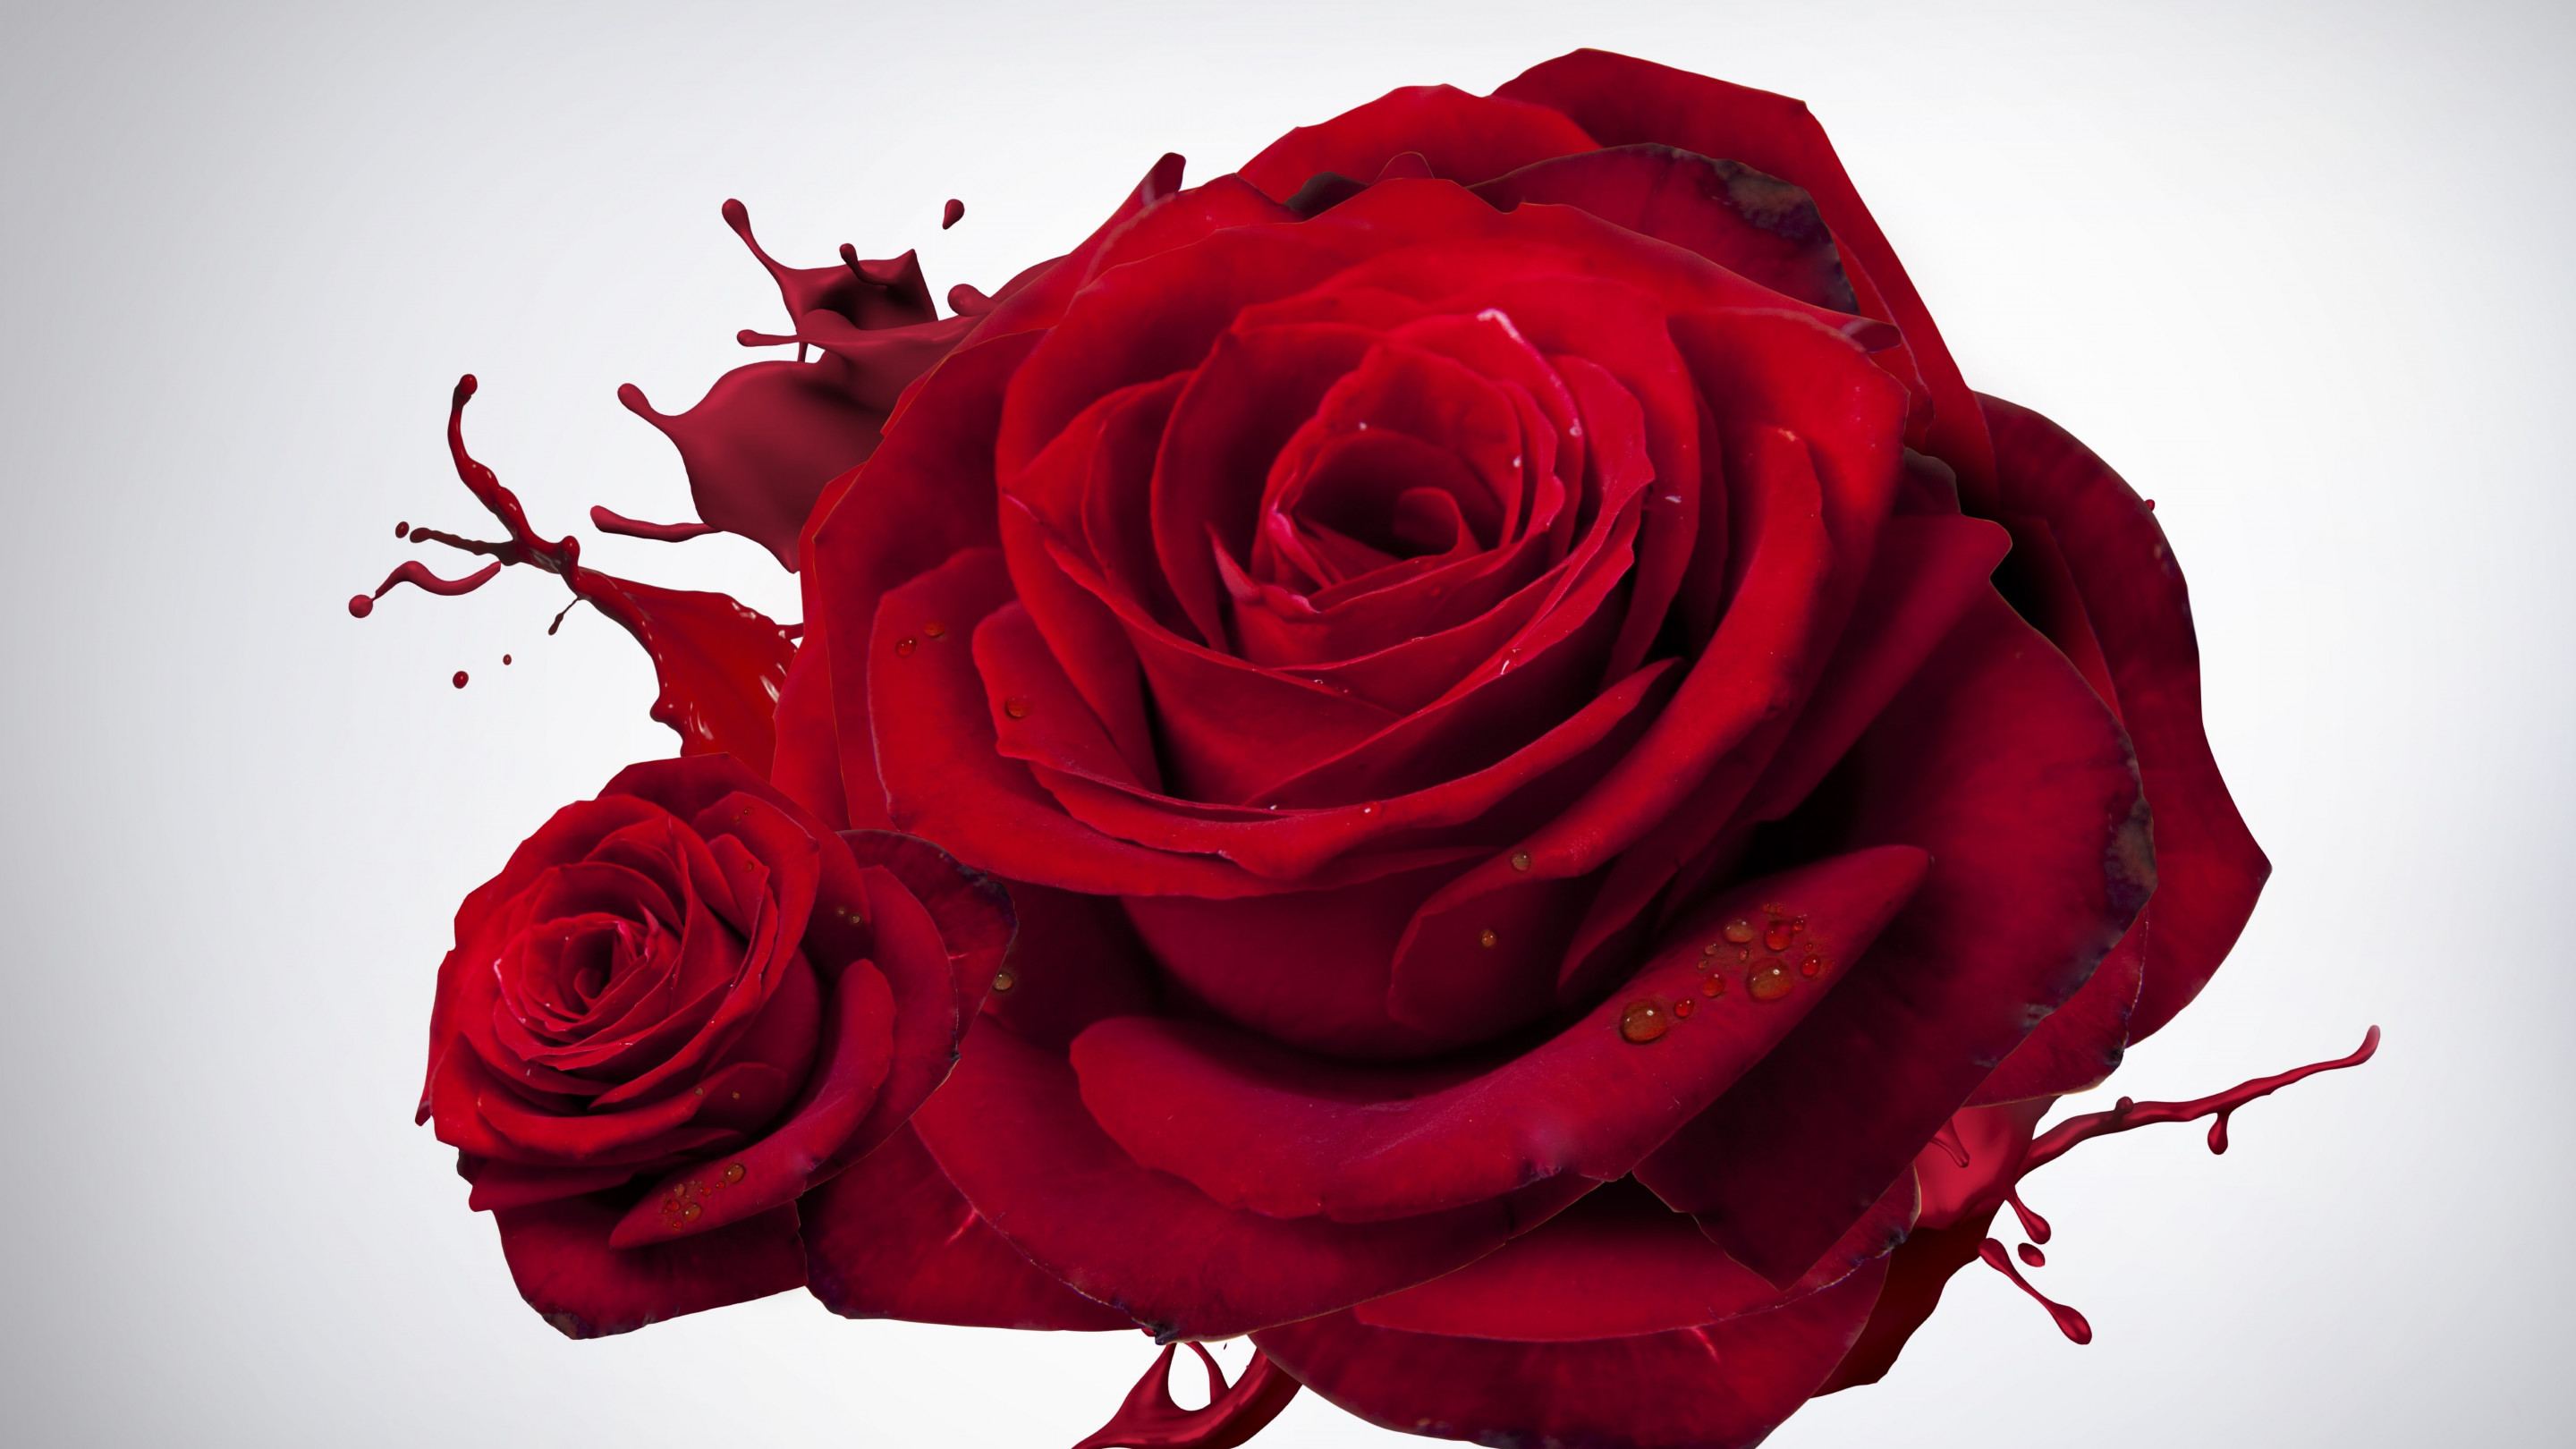 The most beautiful red roses wallpaper 2880x1620